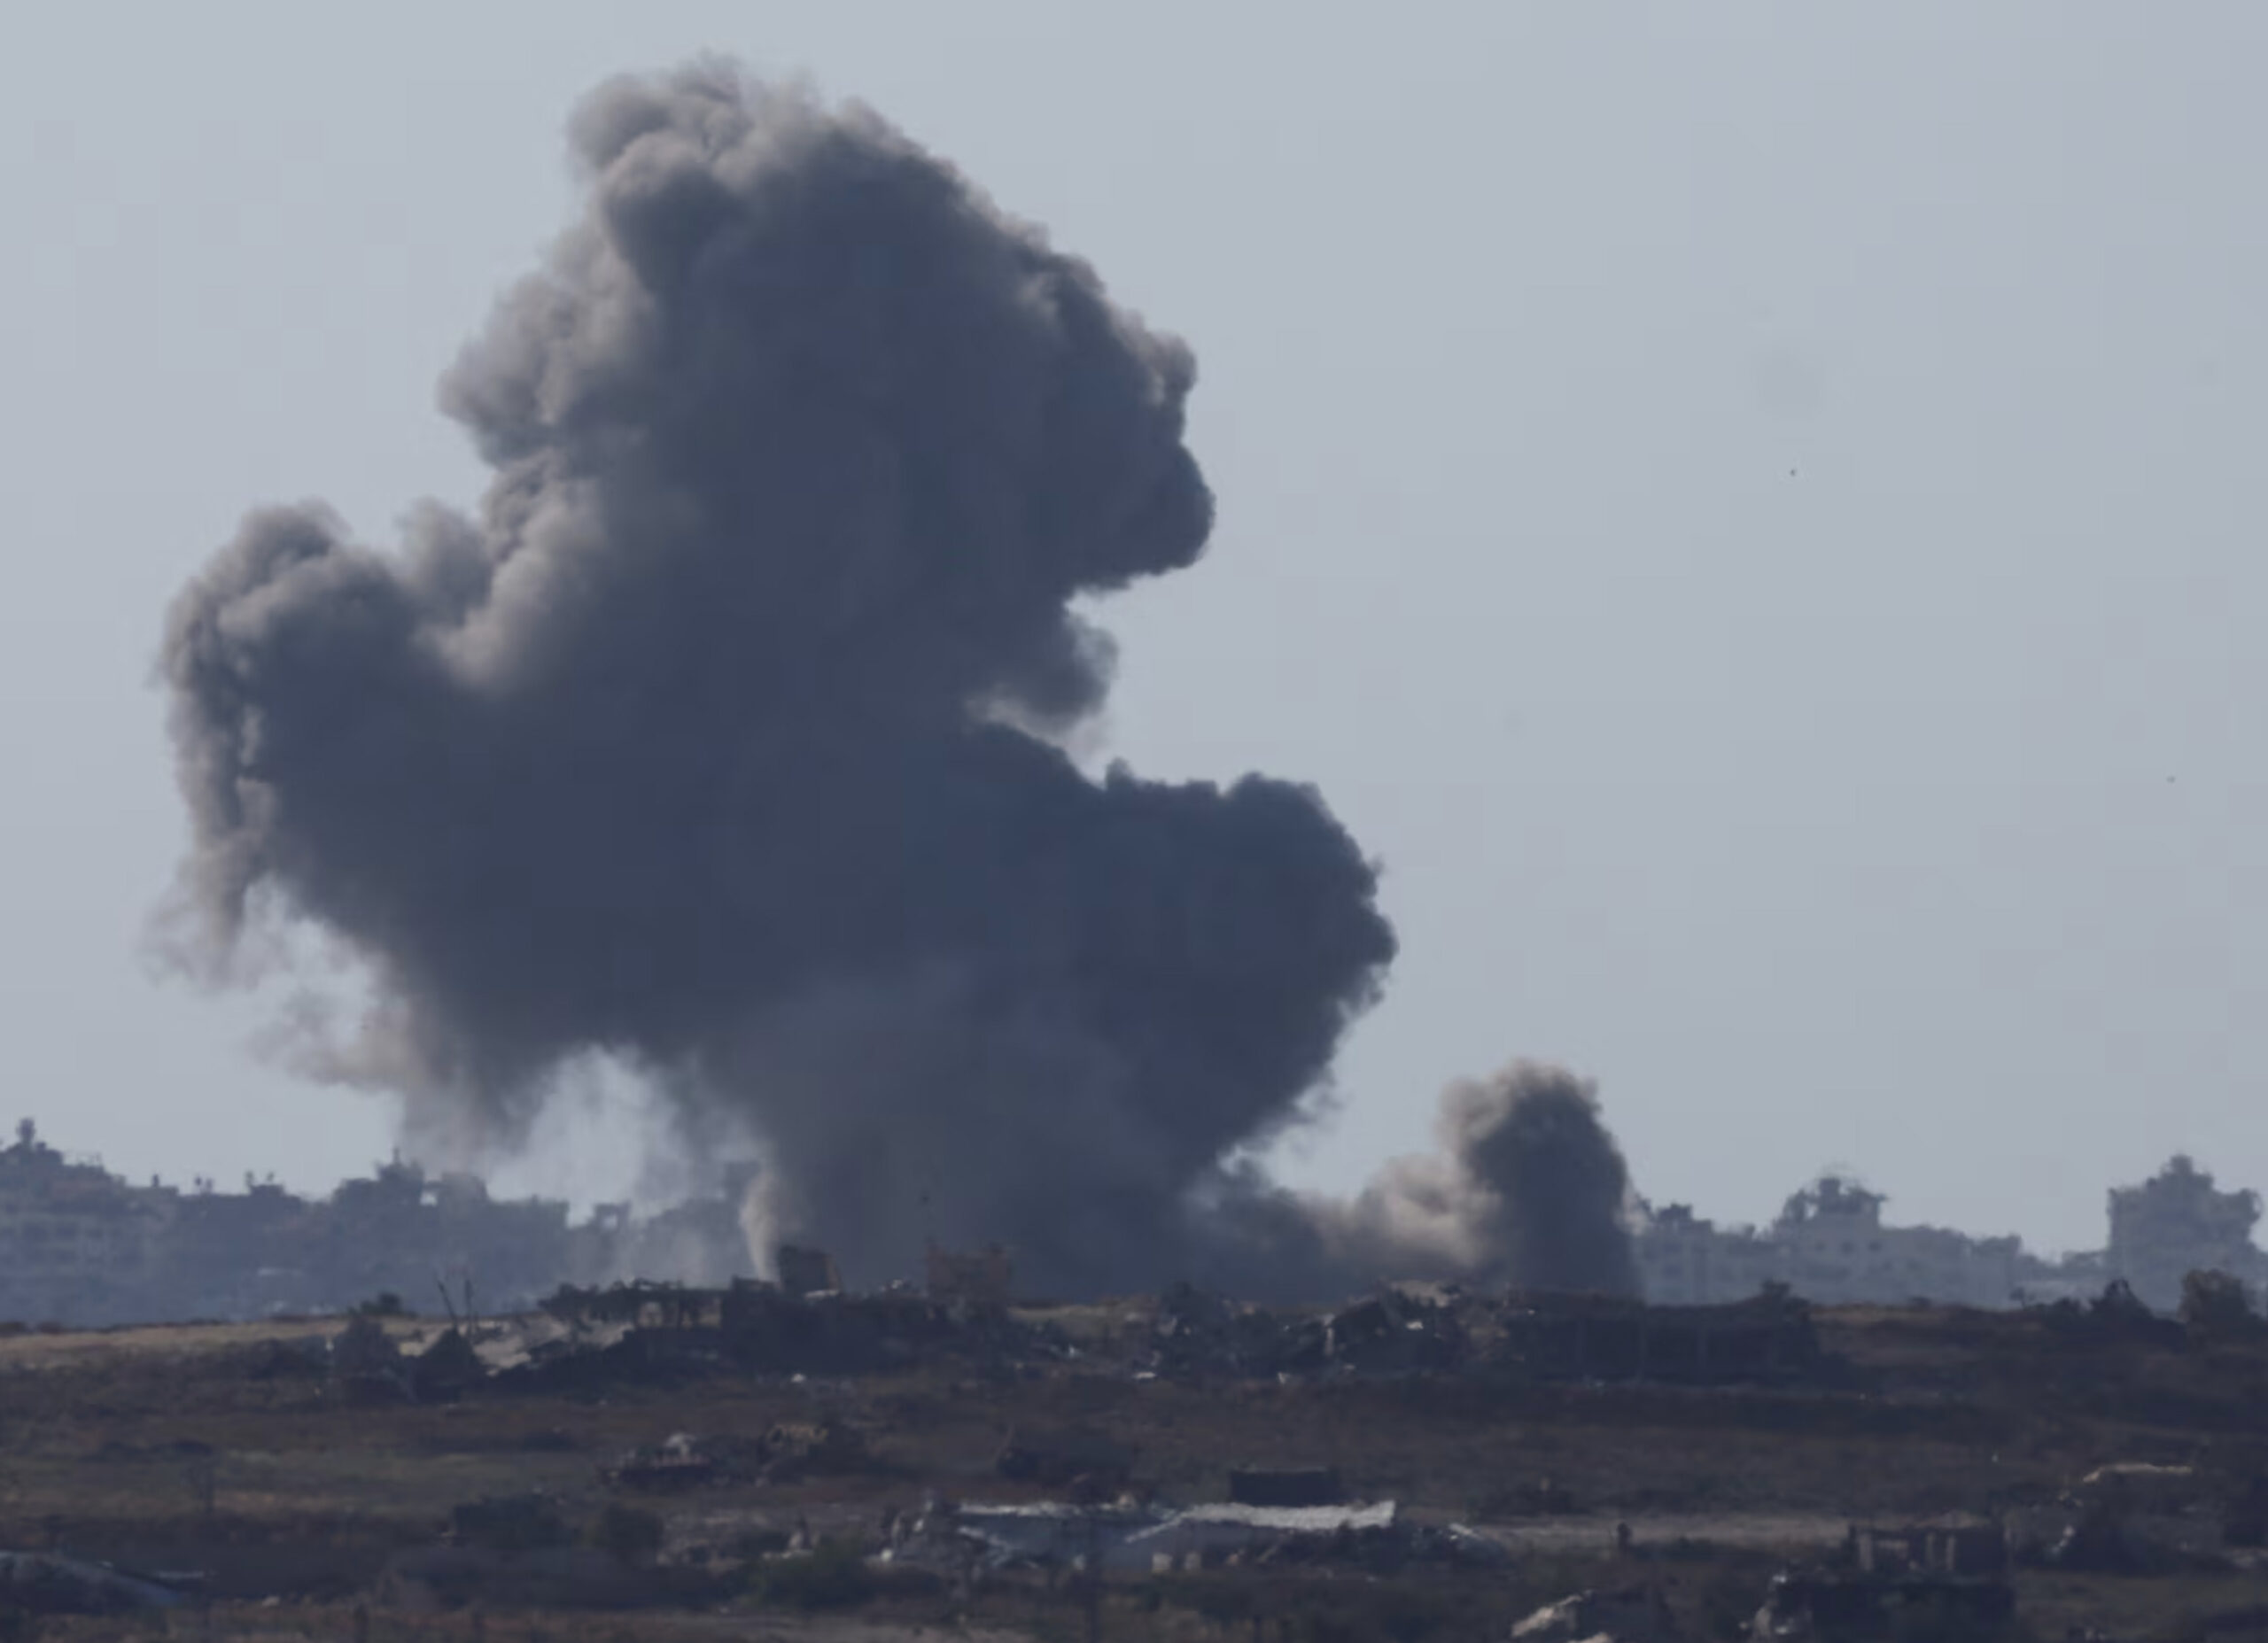 Smoke rises from an explosion following an Israeli airstrike in northern Gaza, near the Israel-Gaza border, amid the ongoing conflict between Israel and the Palestinian Islamist group Hamas, as seen from Israel, May 15. – Reuters